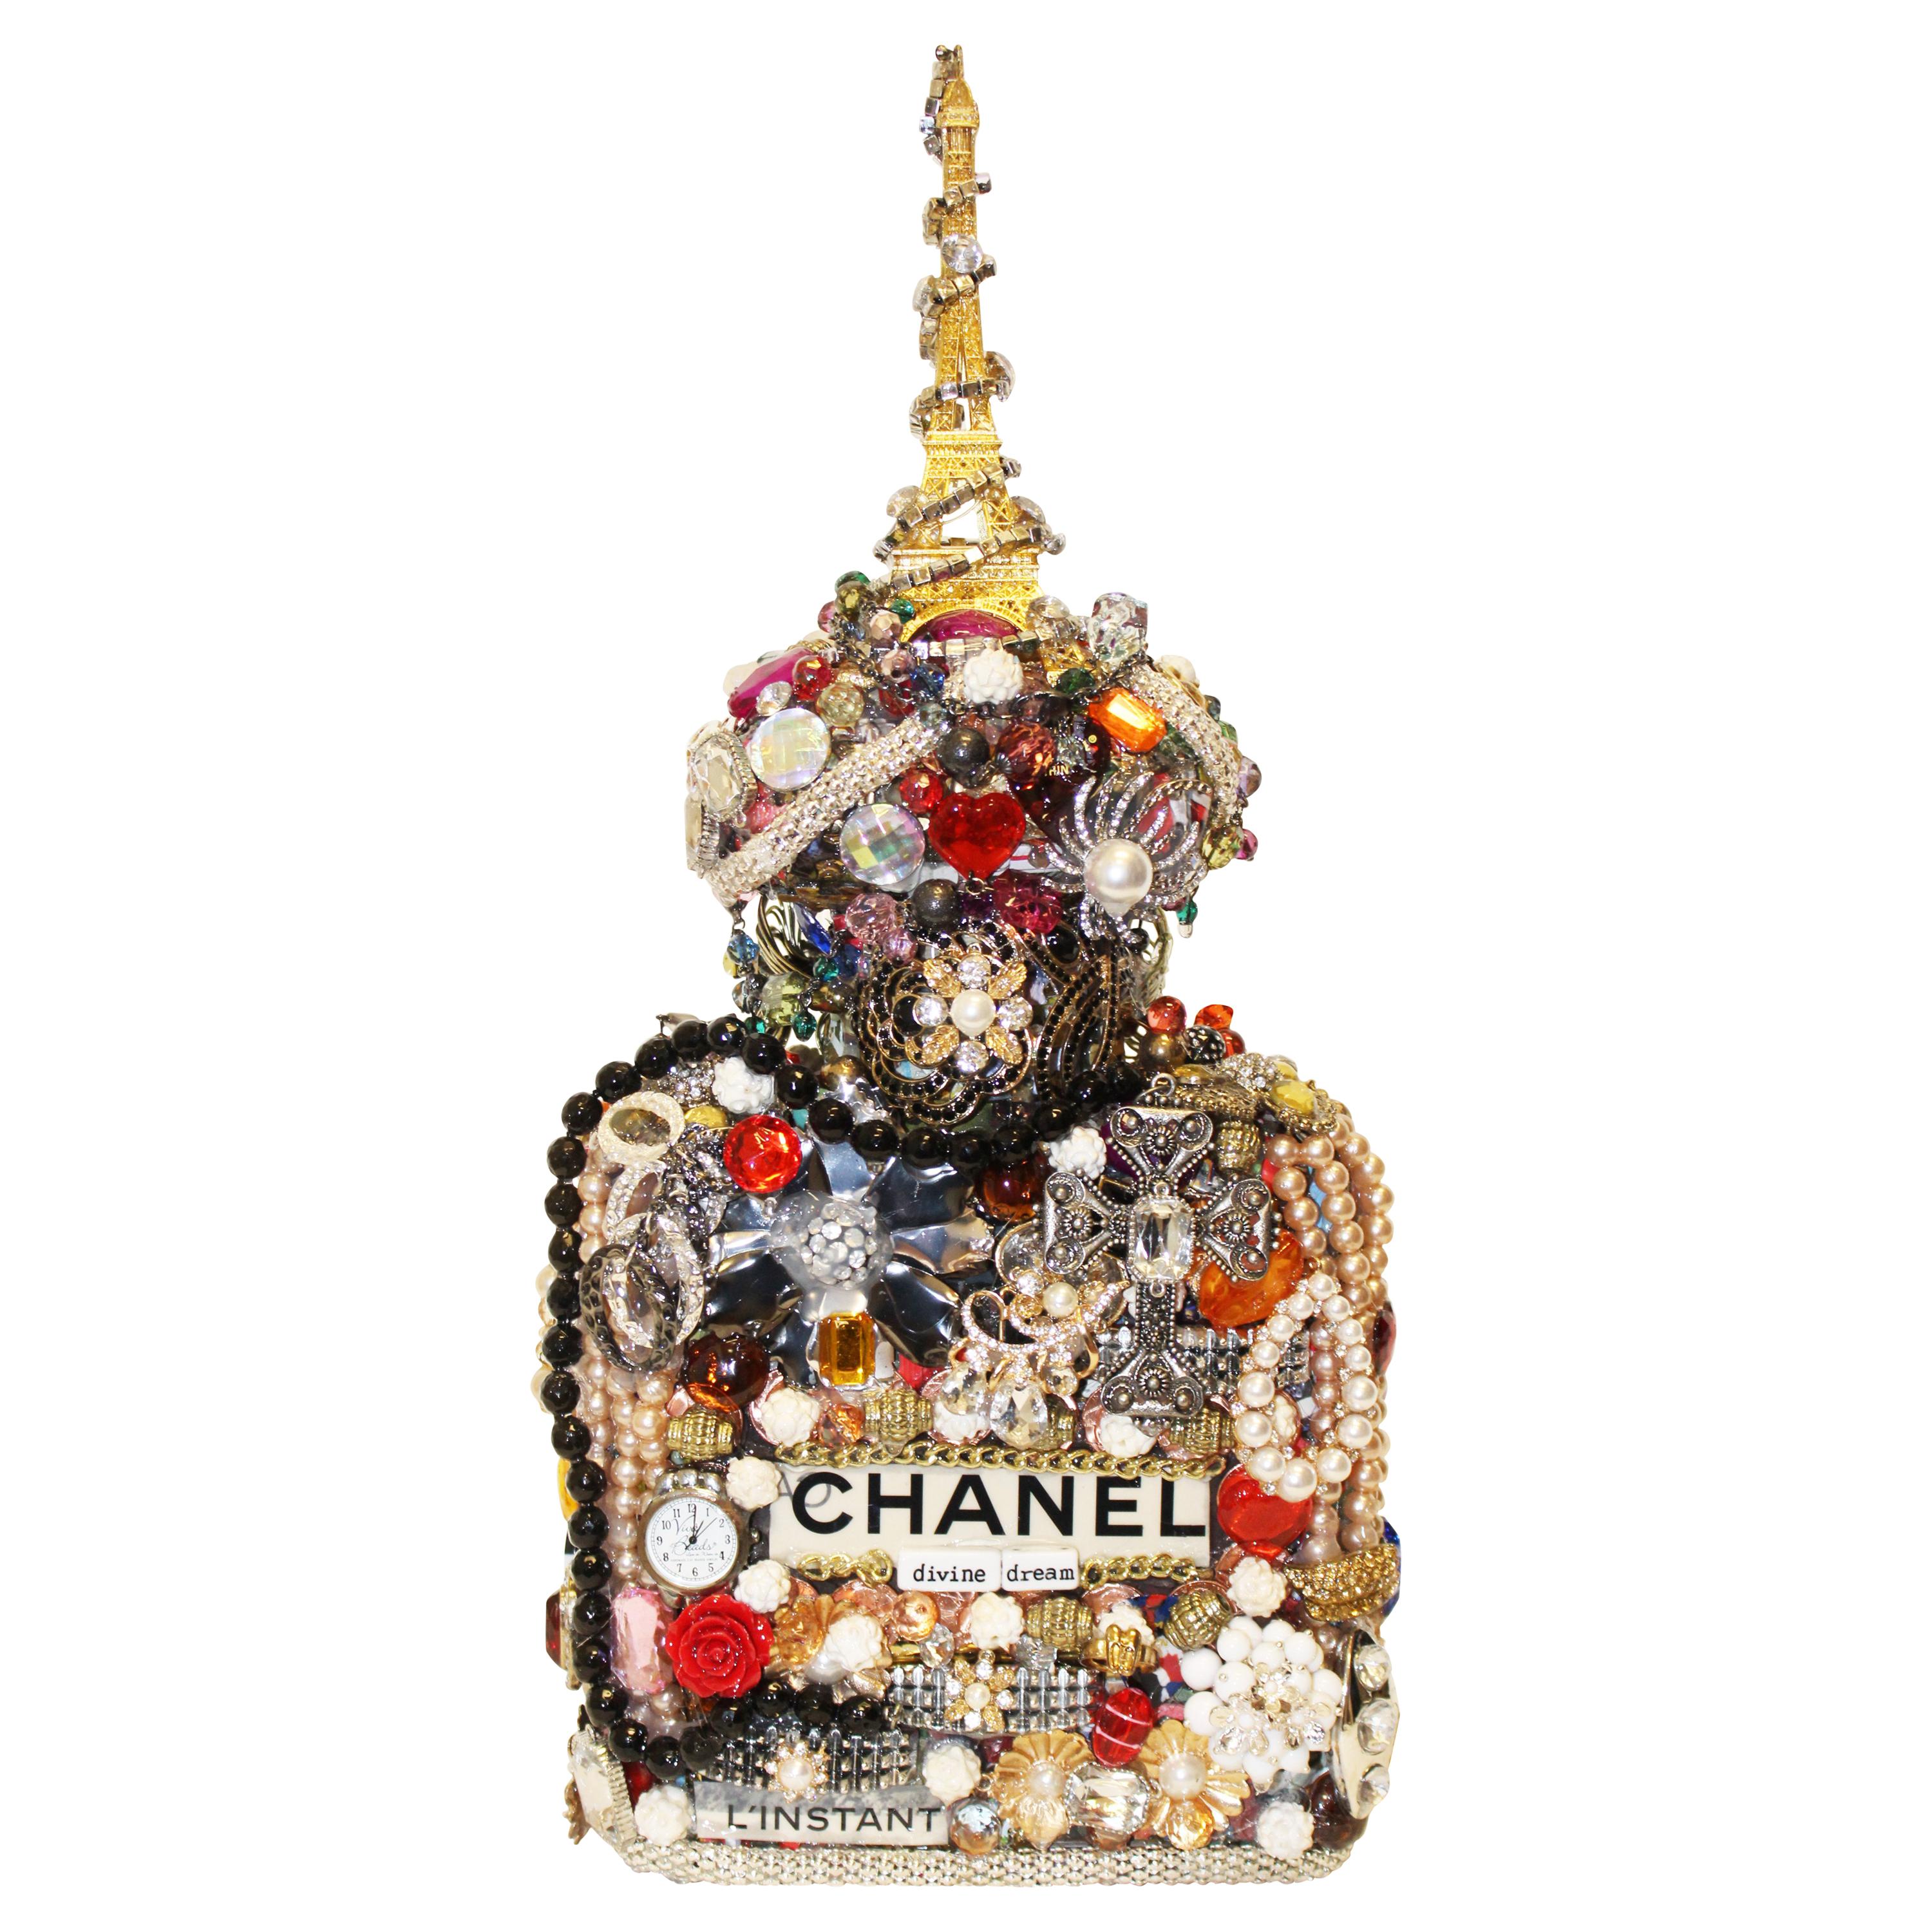 One of a Kind Eclectic Embellished Chanel Eiffel Tower Perfume Bottle